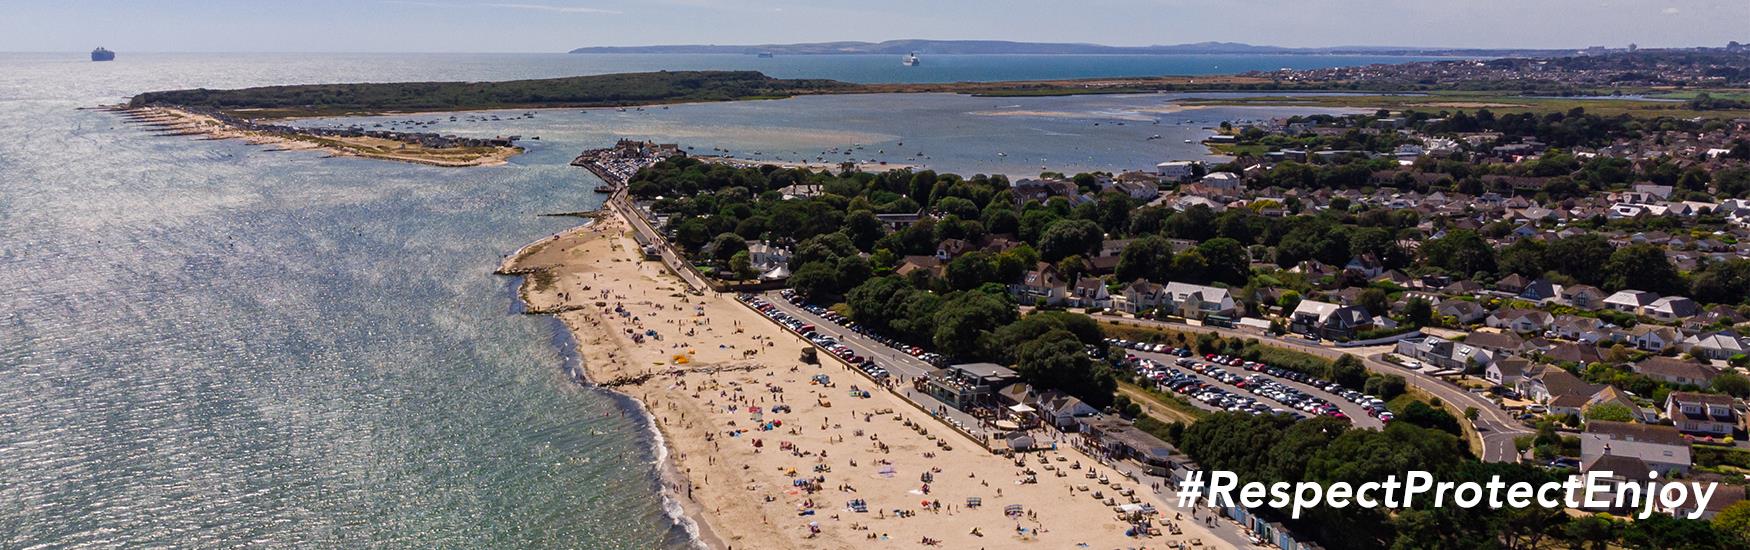 Avon Beach from above looking toward Christchurch Harbour with the text: Respect, Protect, Enjoy.